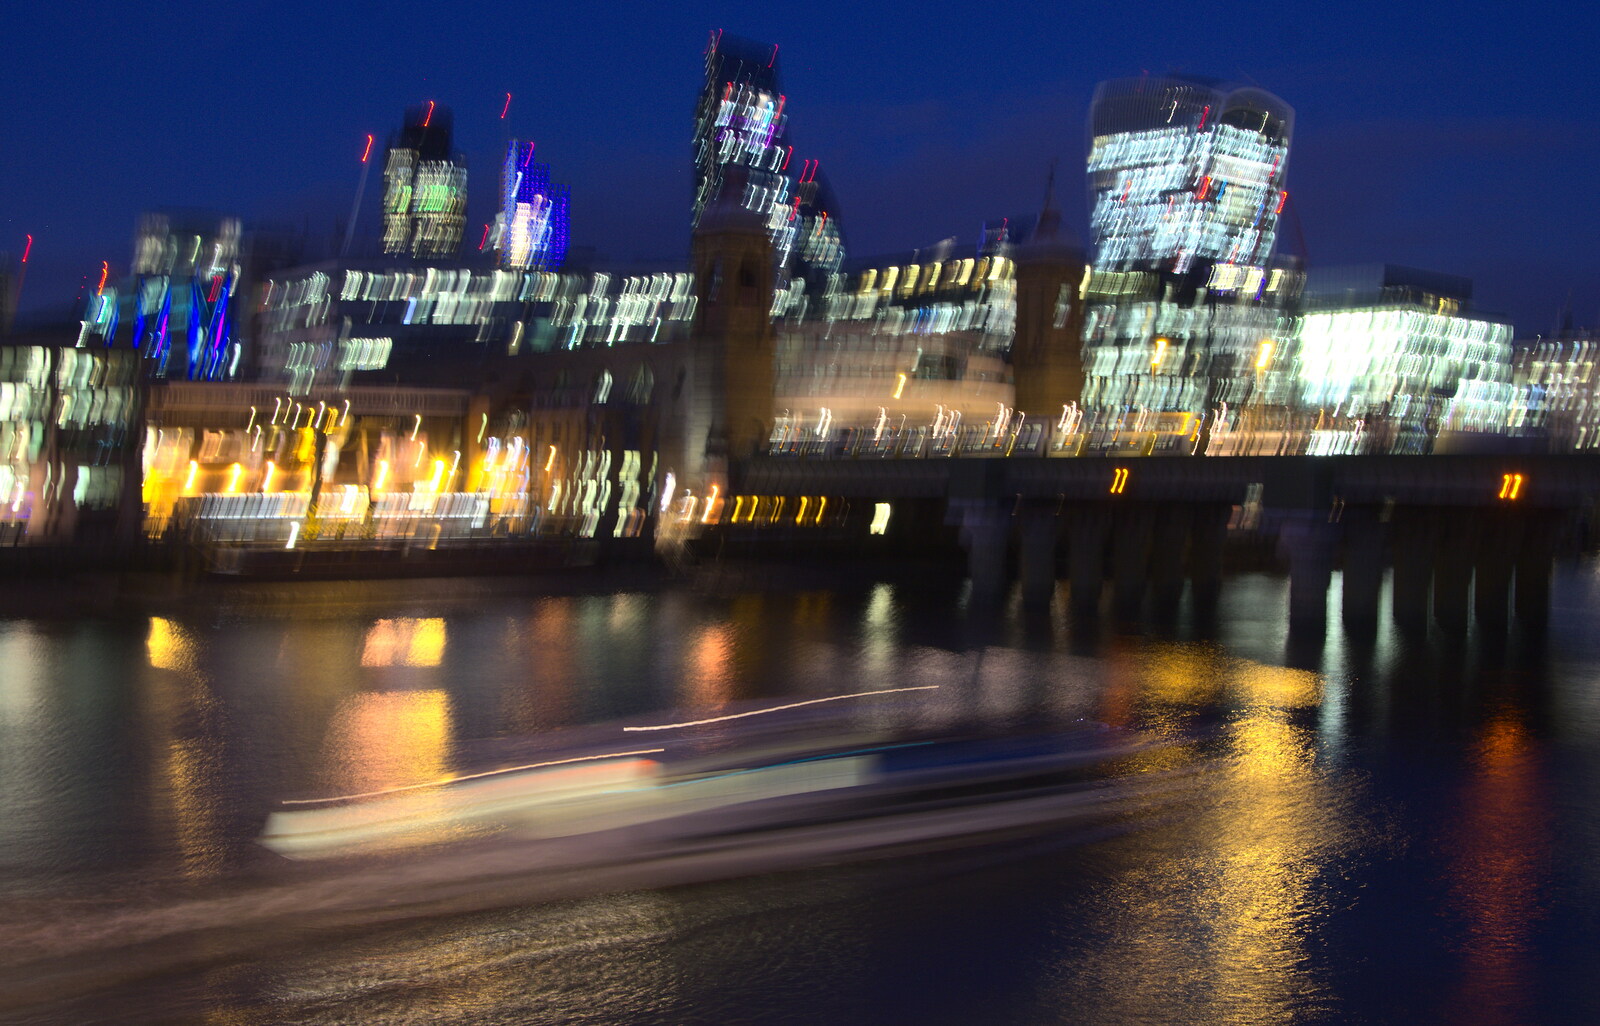 A blur of The Thames at night from SwiftKey Innovation Week, Southwark Bridge Road, London - 7th October 2015